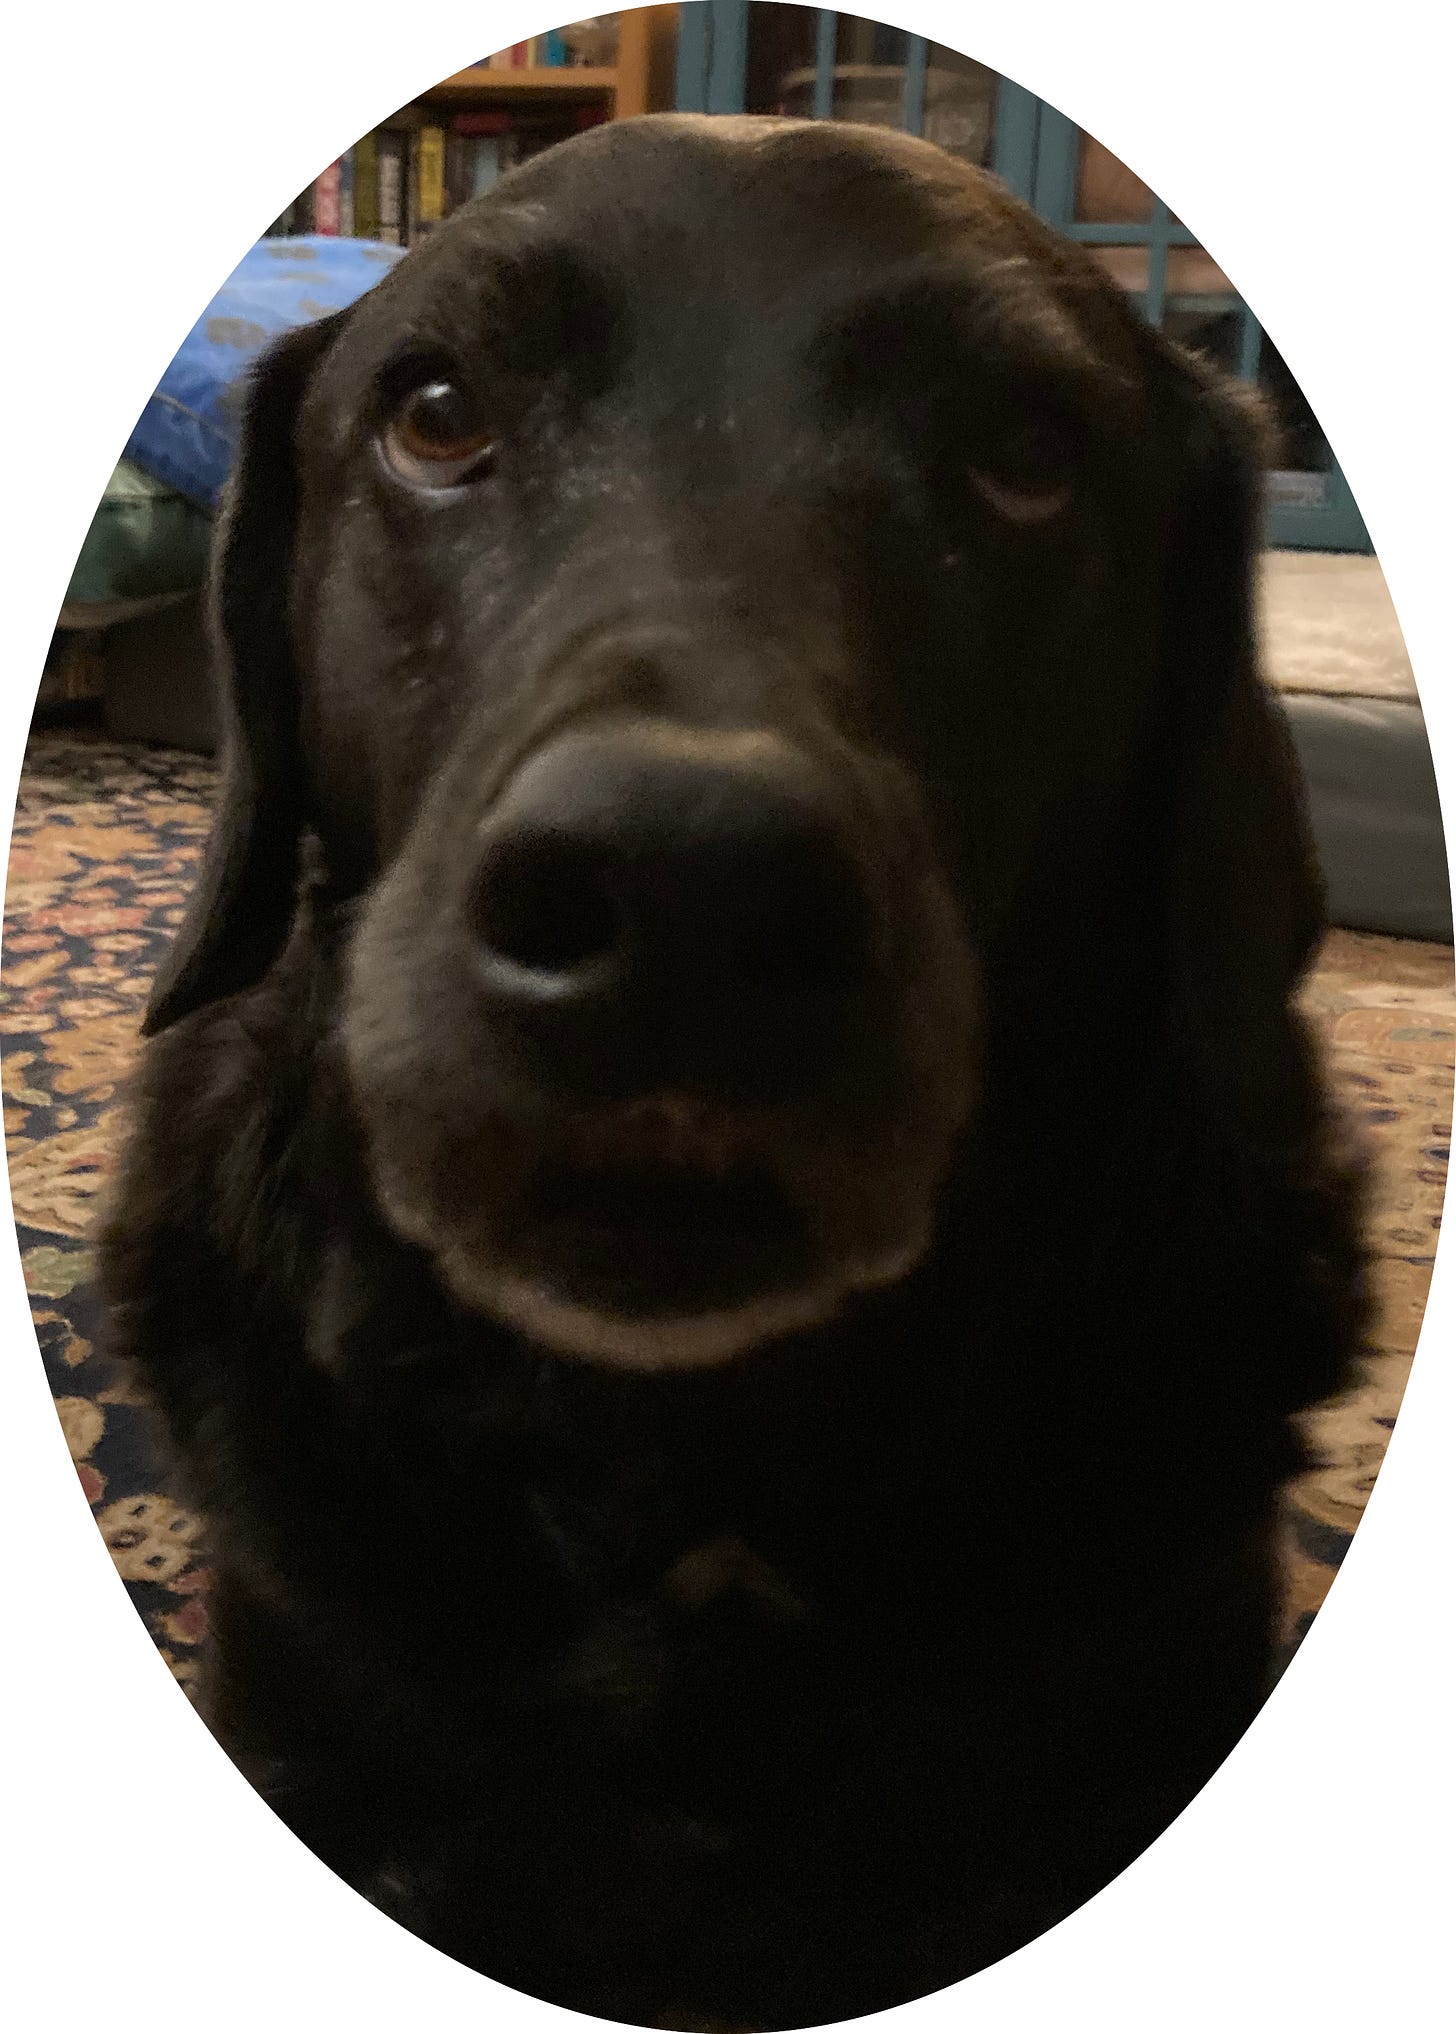 Ande, the black lab, poses looking directly at the camera with her usual grace.